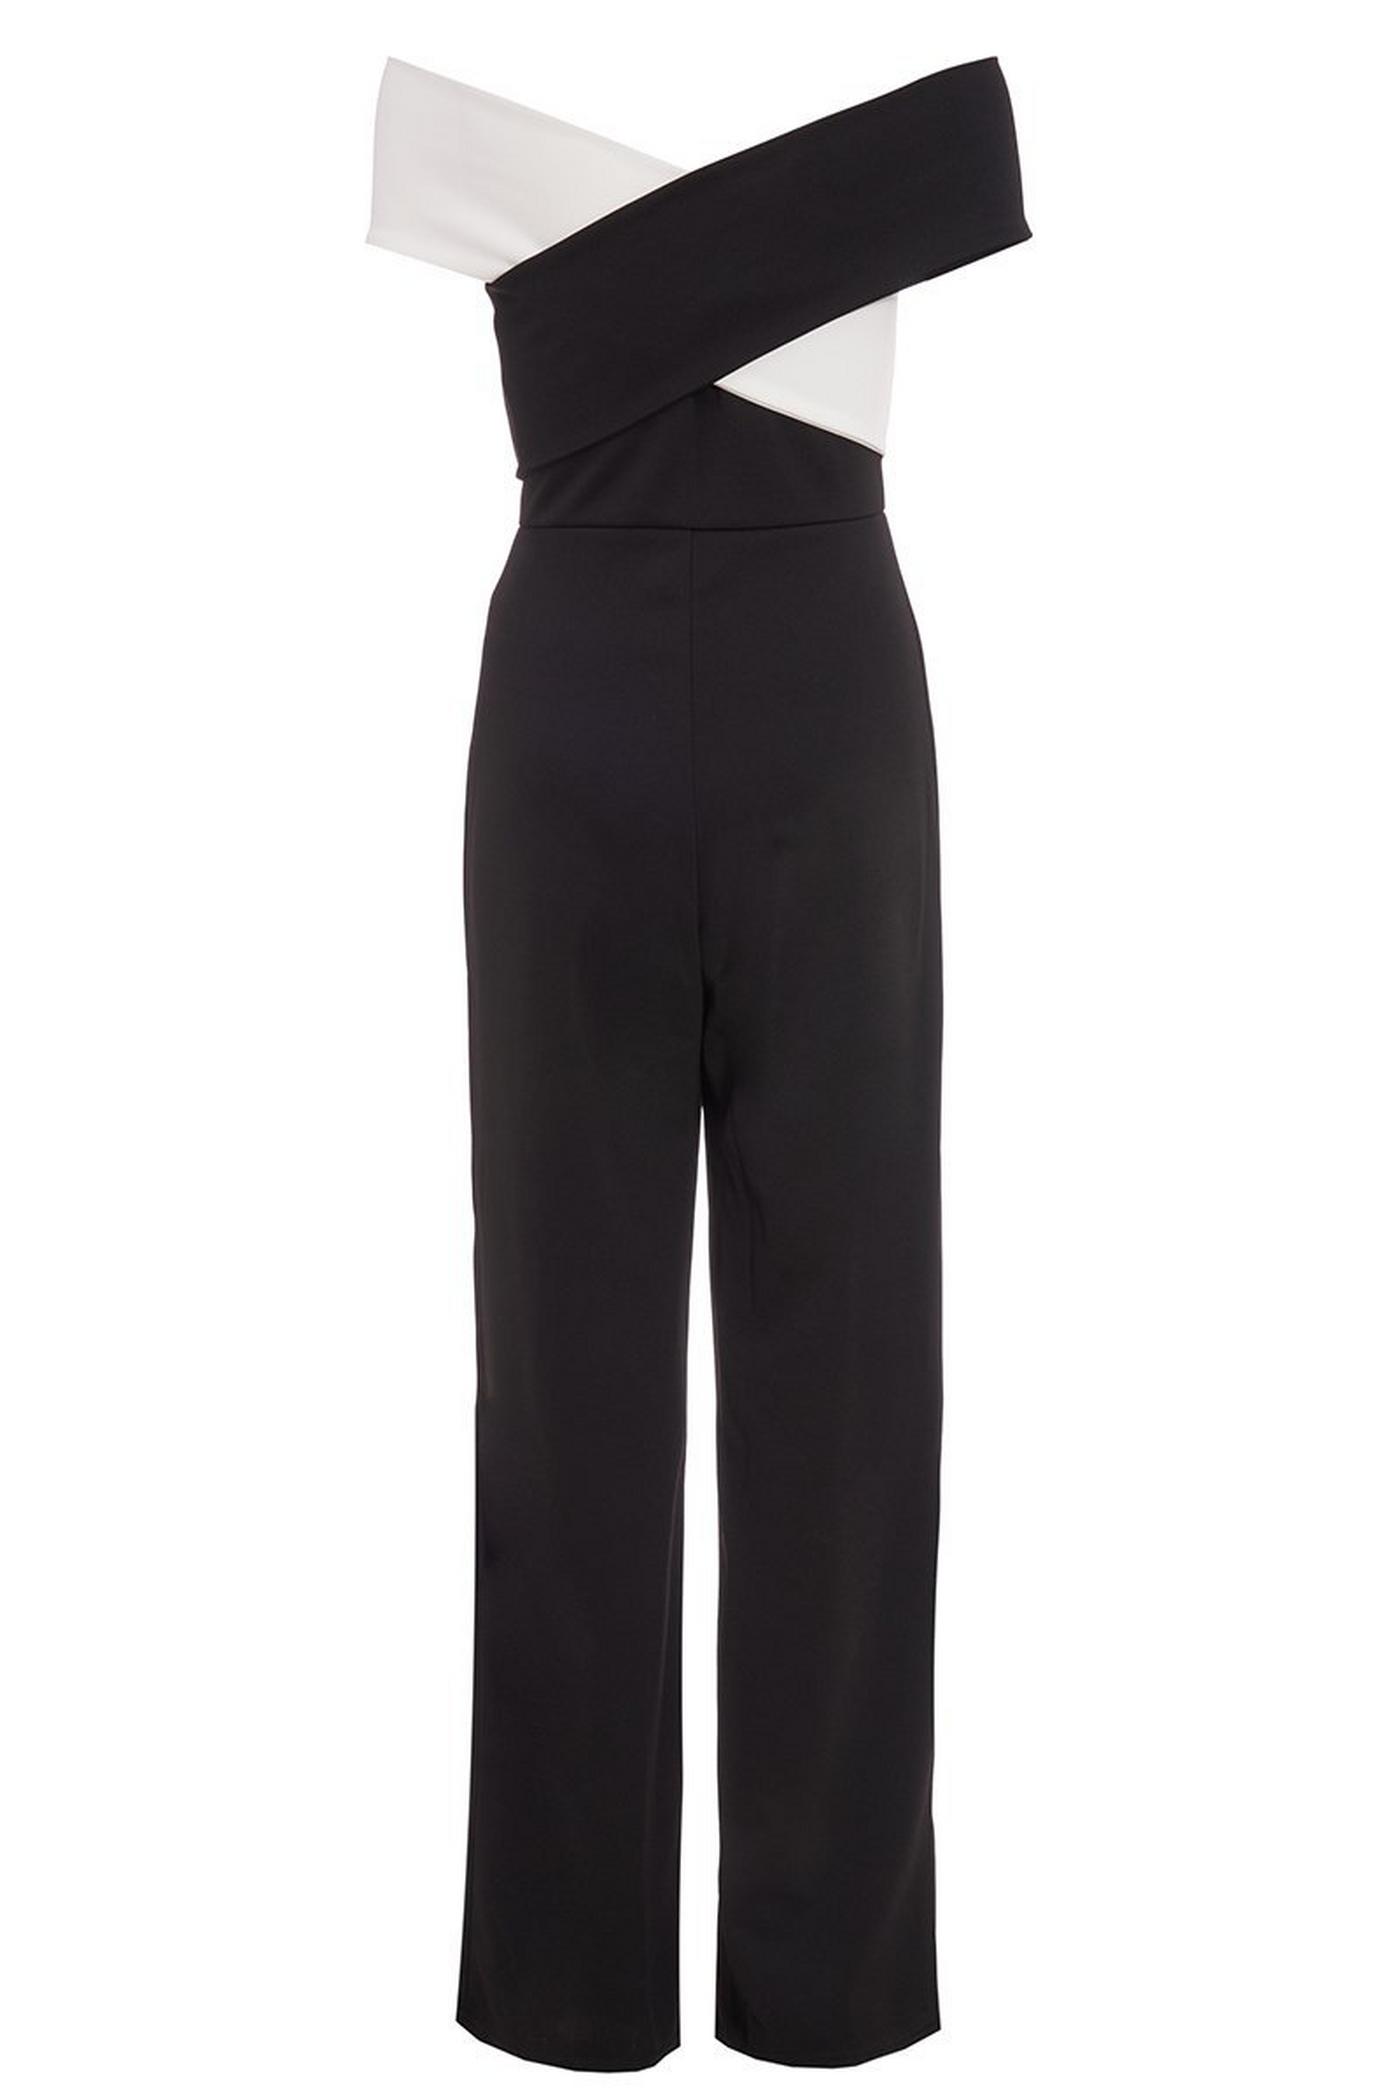 Black And White Cross Over Palazzo Jumpsuit